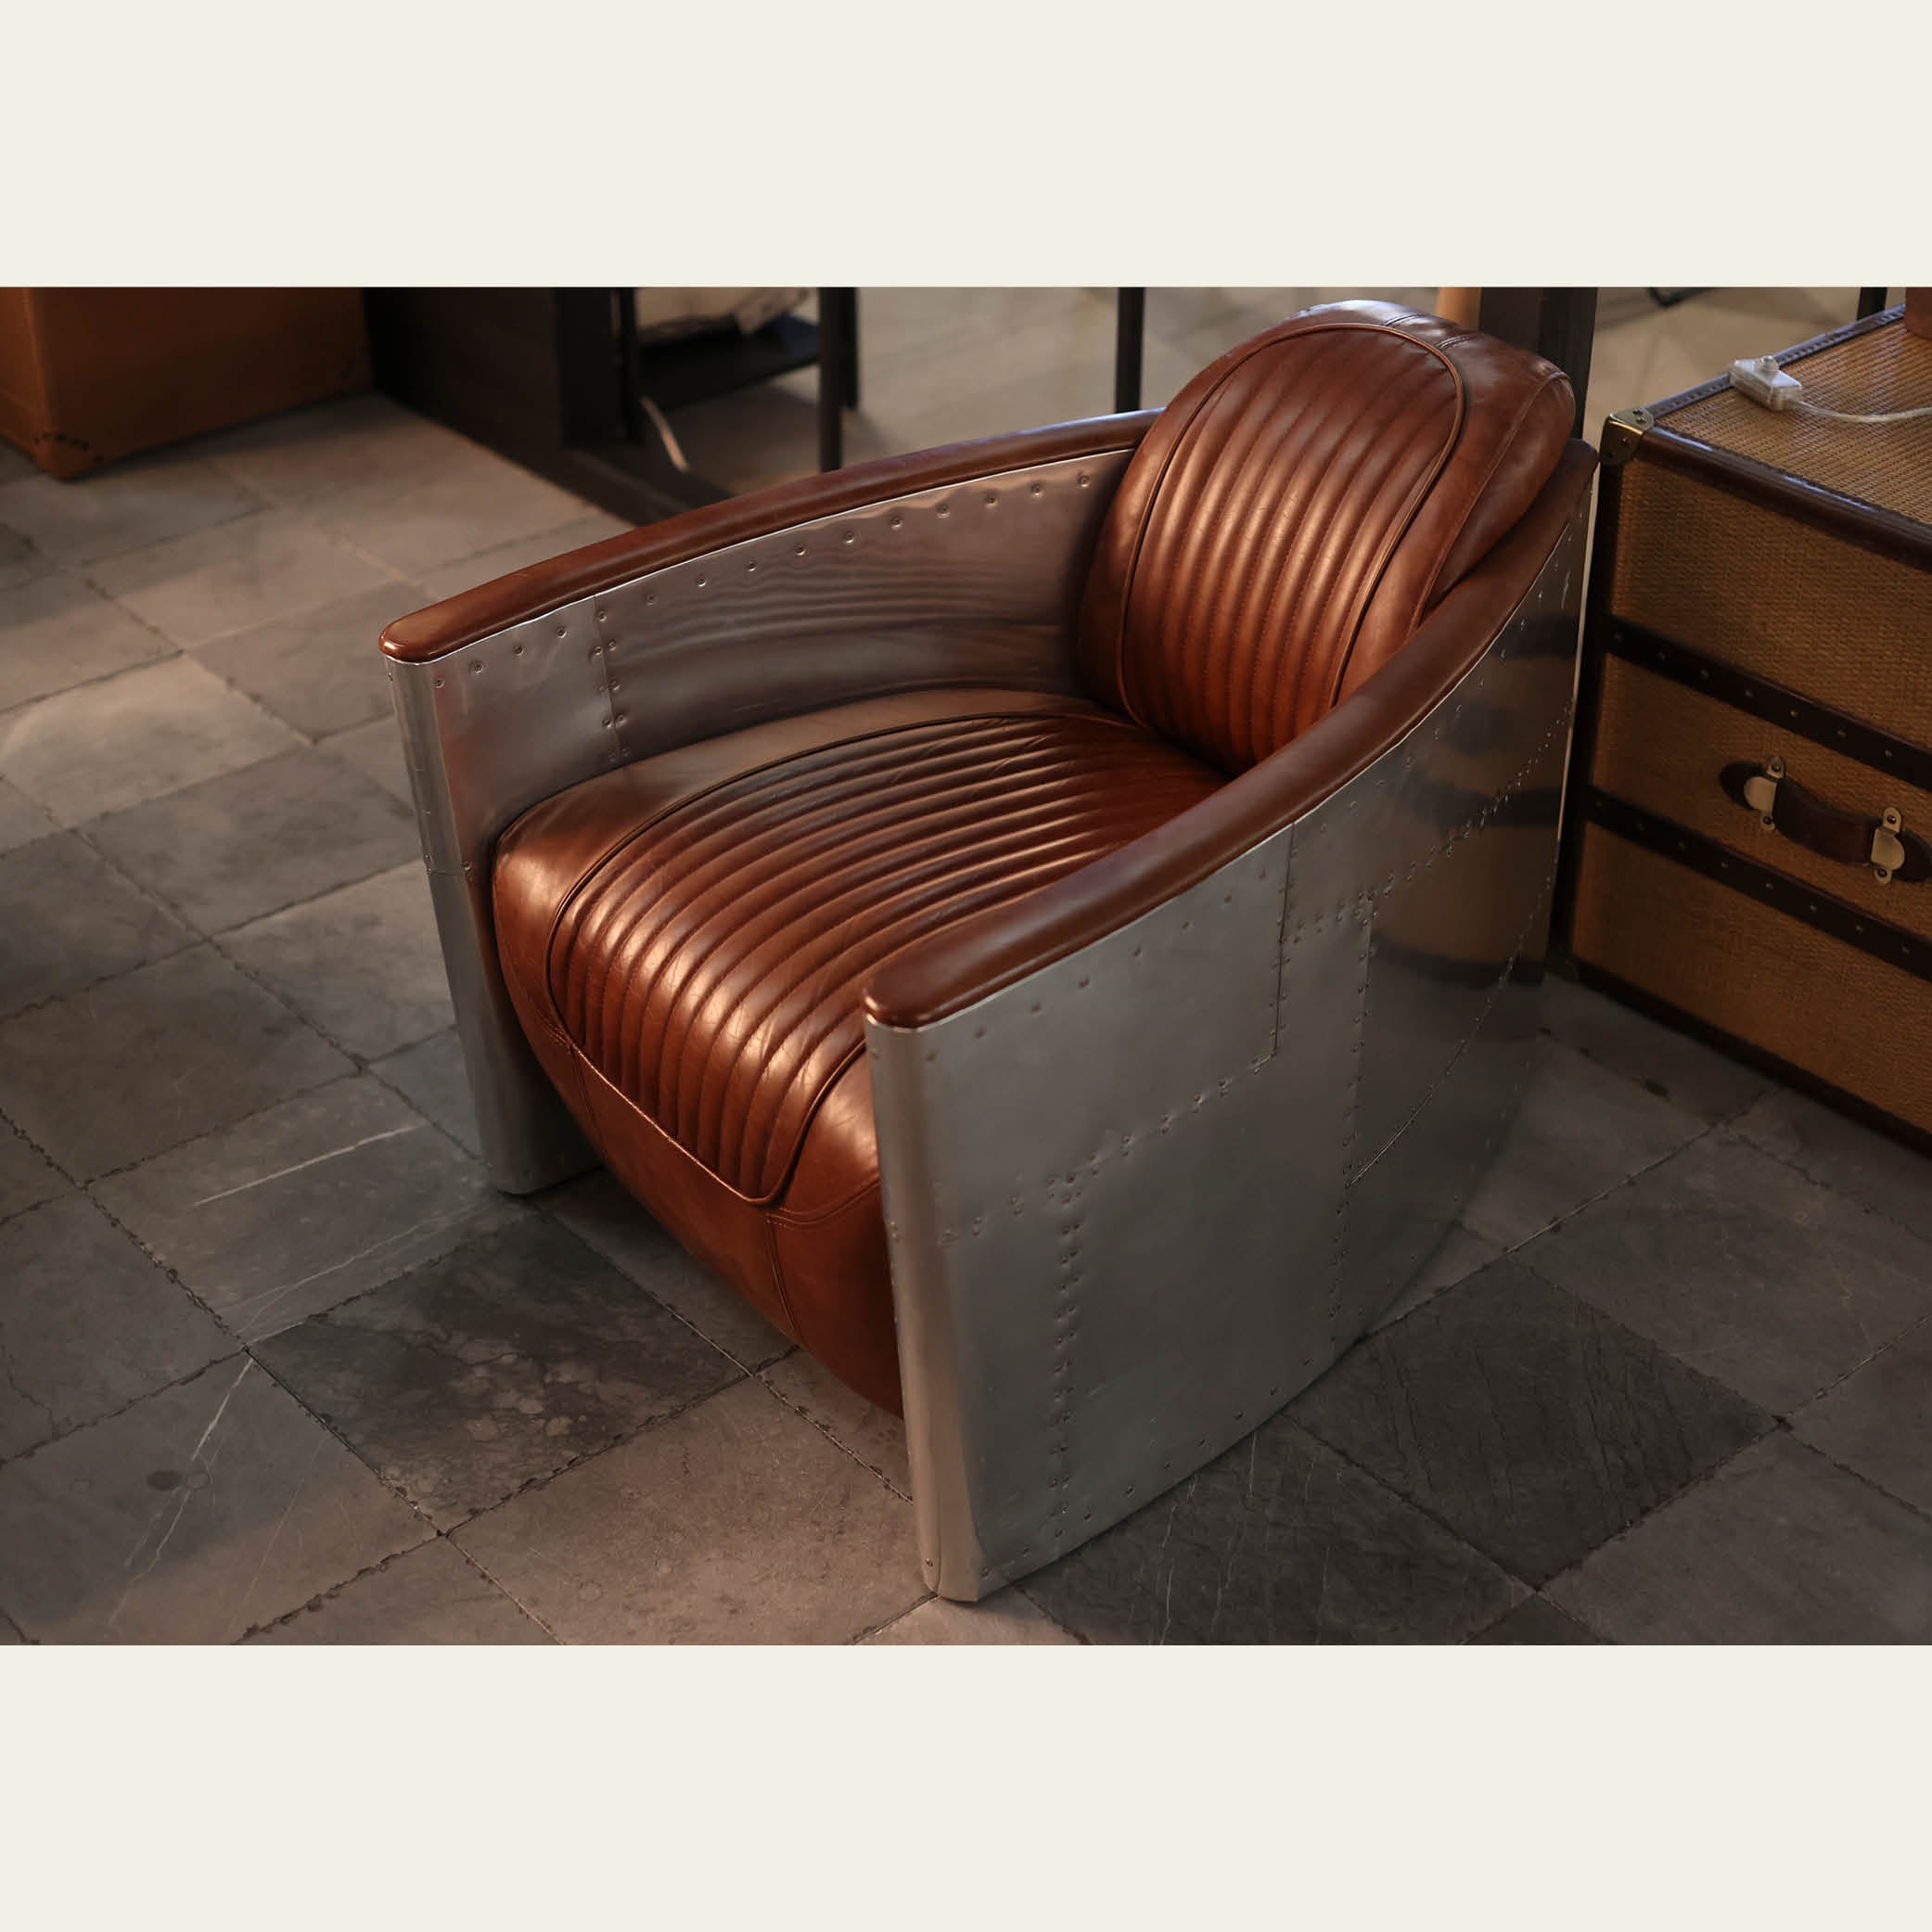 EXPO Timothy Oulton AVIATOR TOMCAT Fauteuil - Antique Whisky